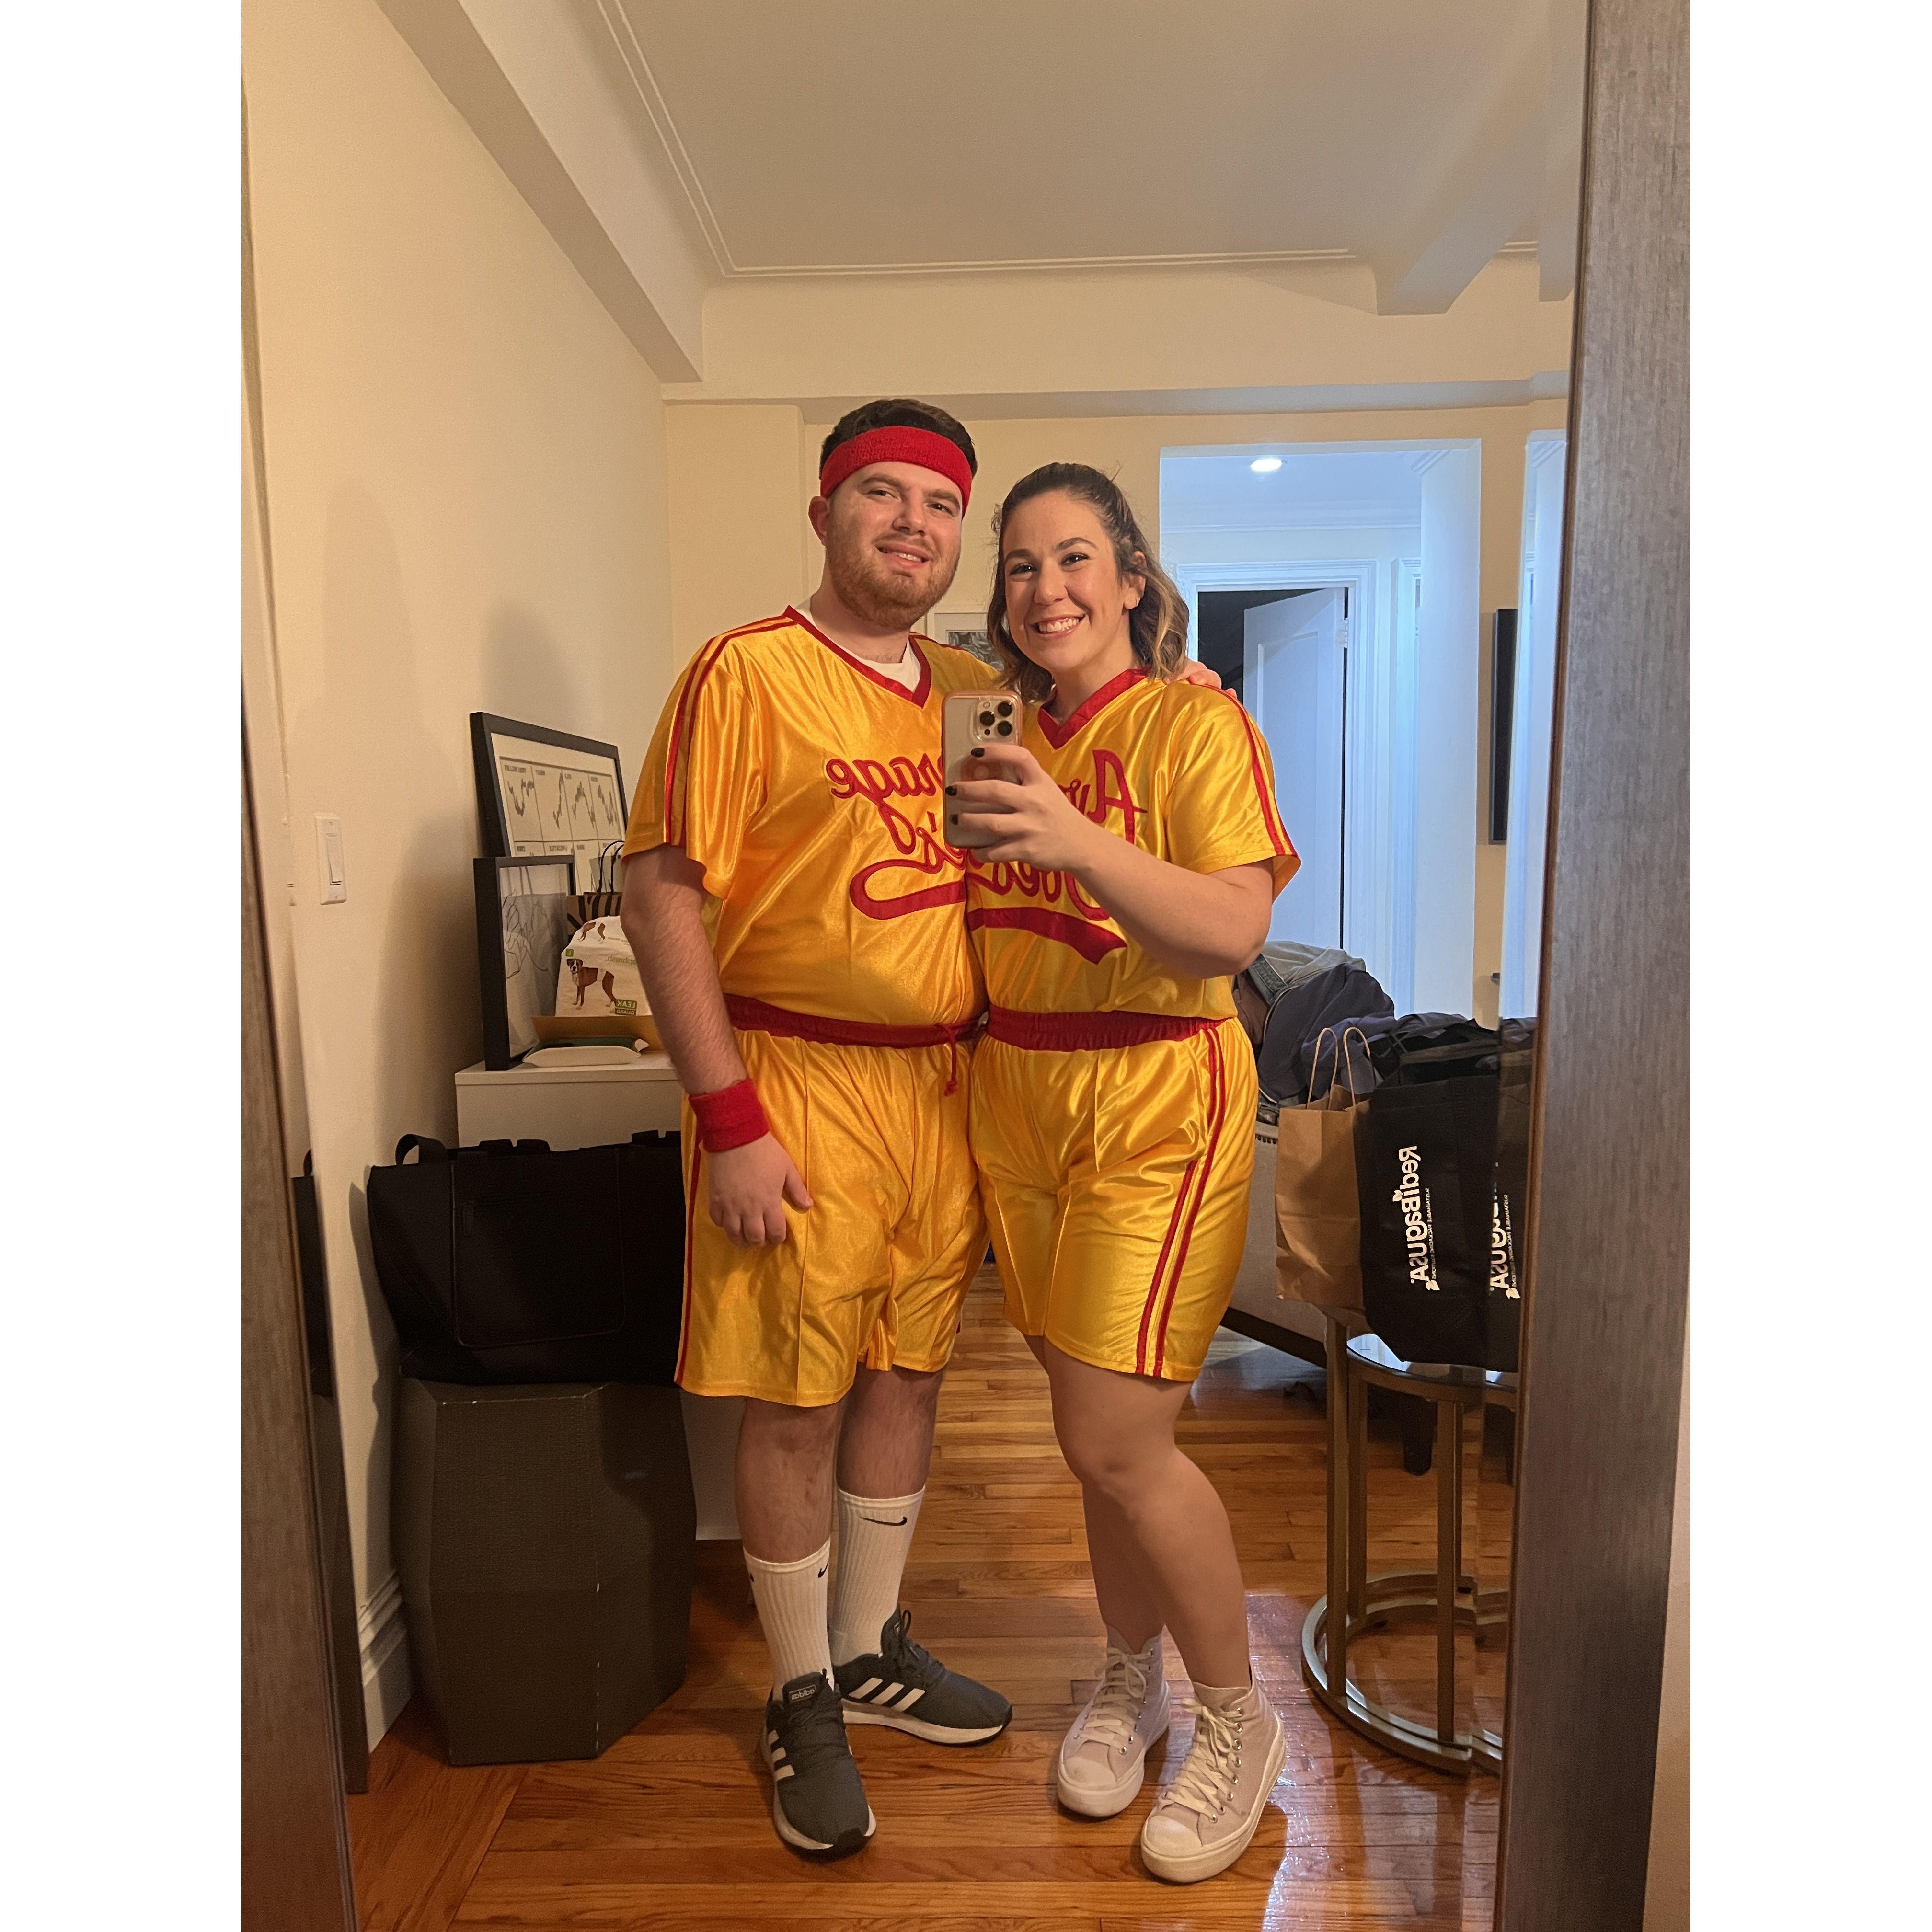 Halloween 2022, we went as The Average Joe's from Dodgeball!